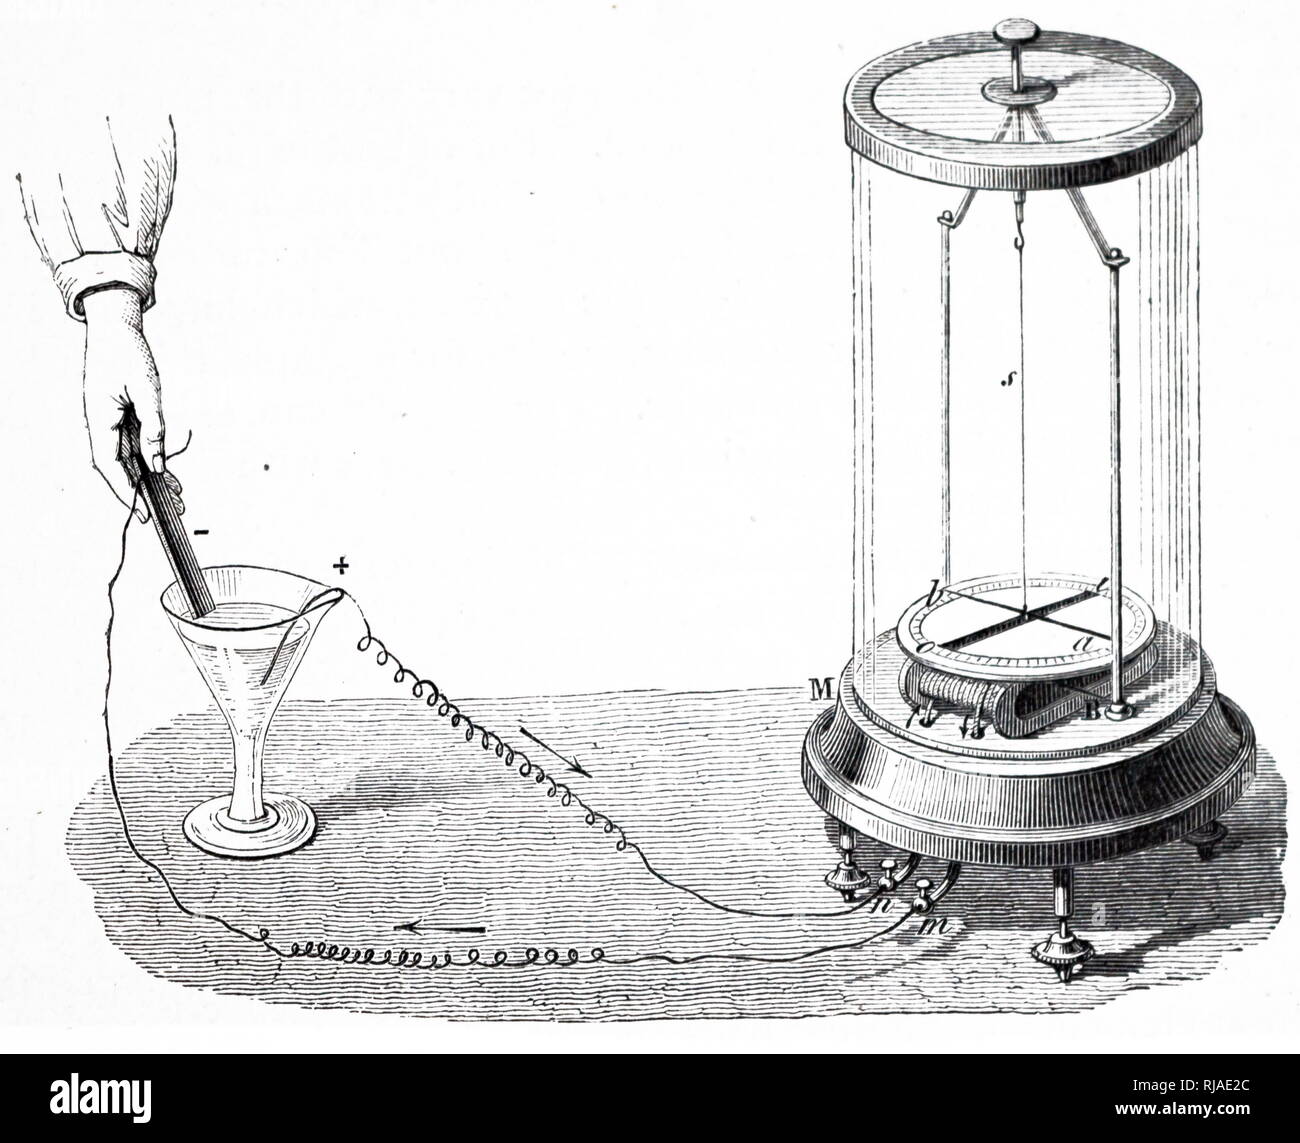 Illustration depicting a Galvanometer showing magnet and rotating coil. A galvanometer is an electromechanical instrument used for detecting and indicating electric current.  Galvanometers developed from the observation that the needle of a magnetic compass is deflected near a wire that has electric current flowing through it, first described by Hans Oersted in 1820. They were the first instruments used to detect and measure small amounts of electric currents. Stock Photo